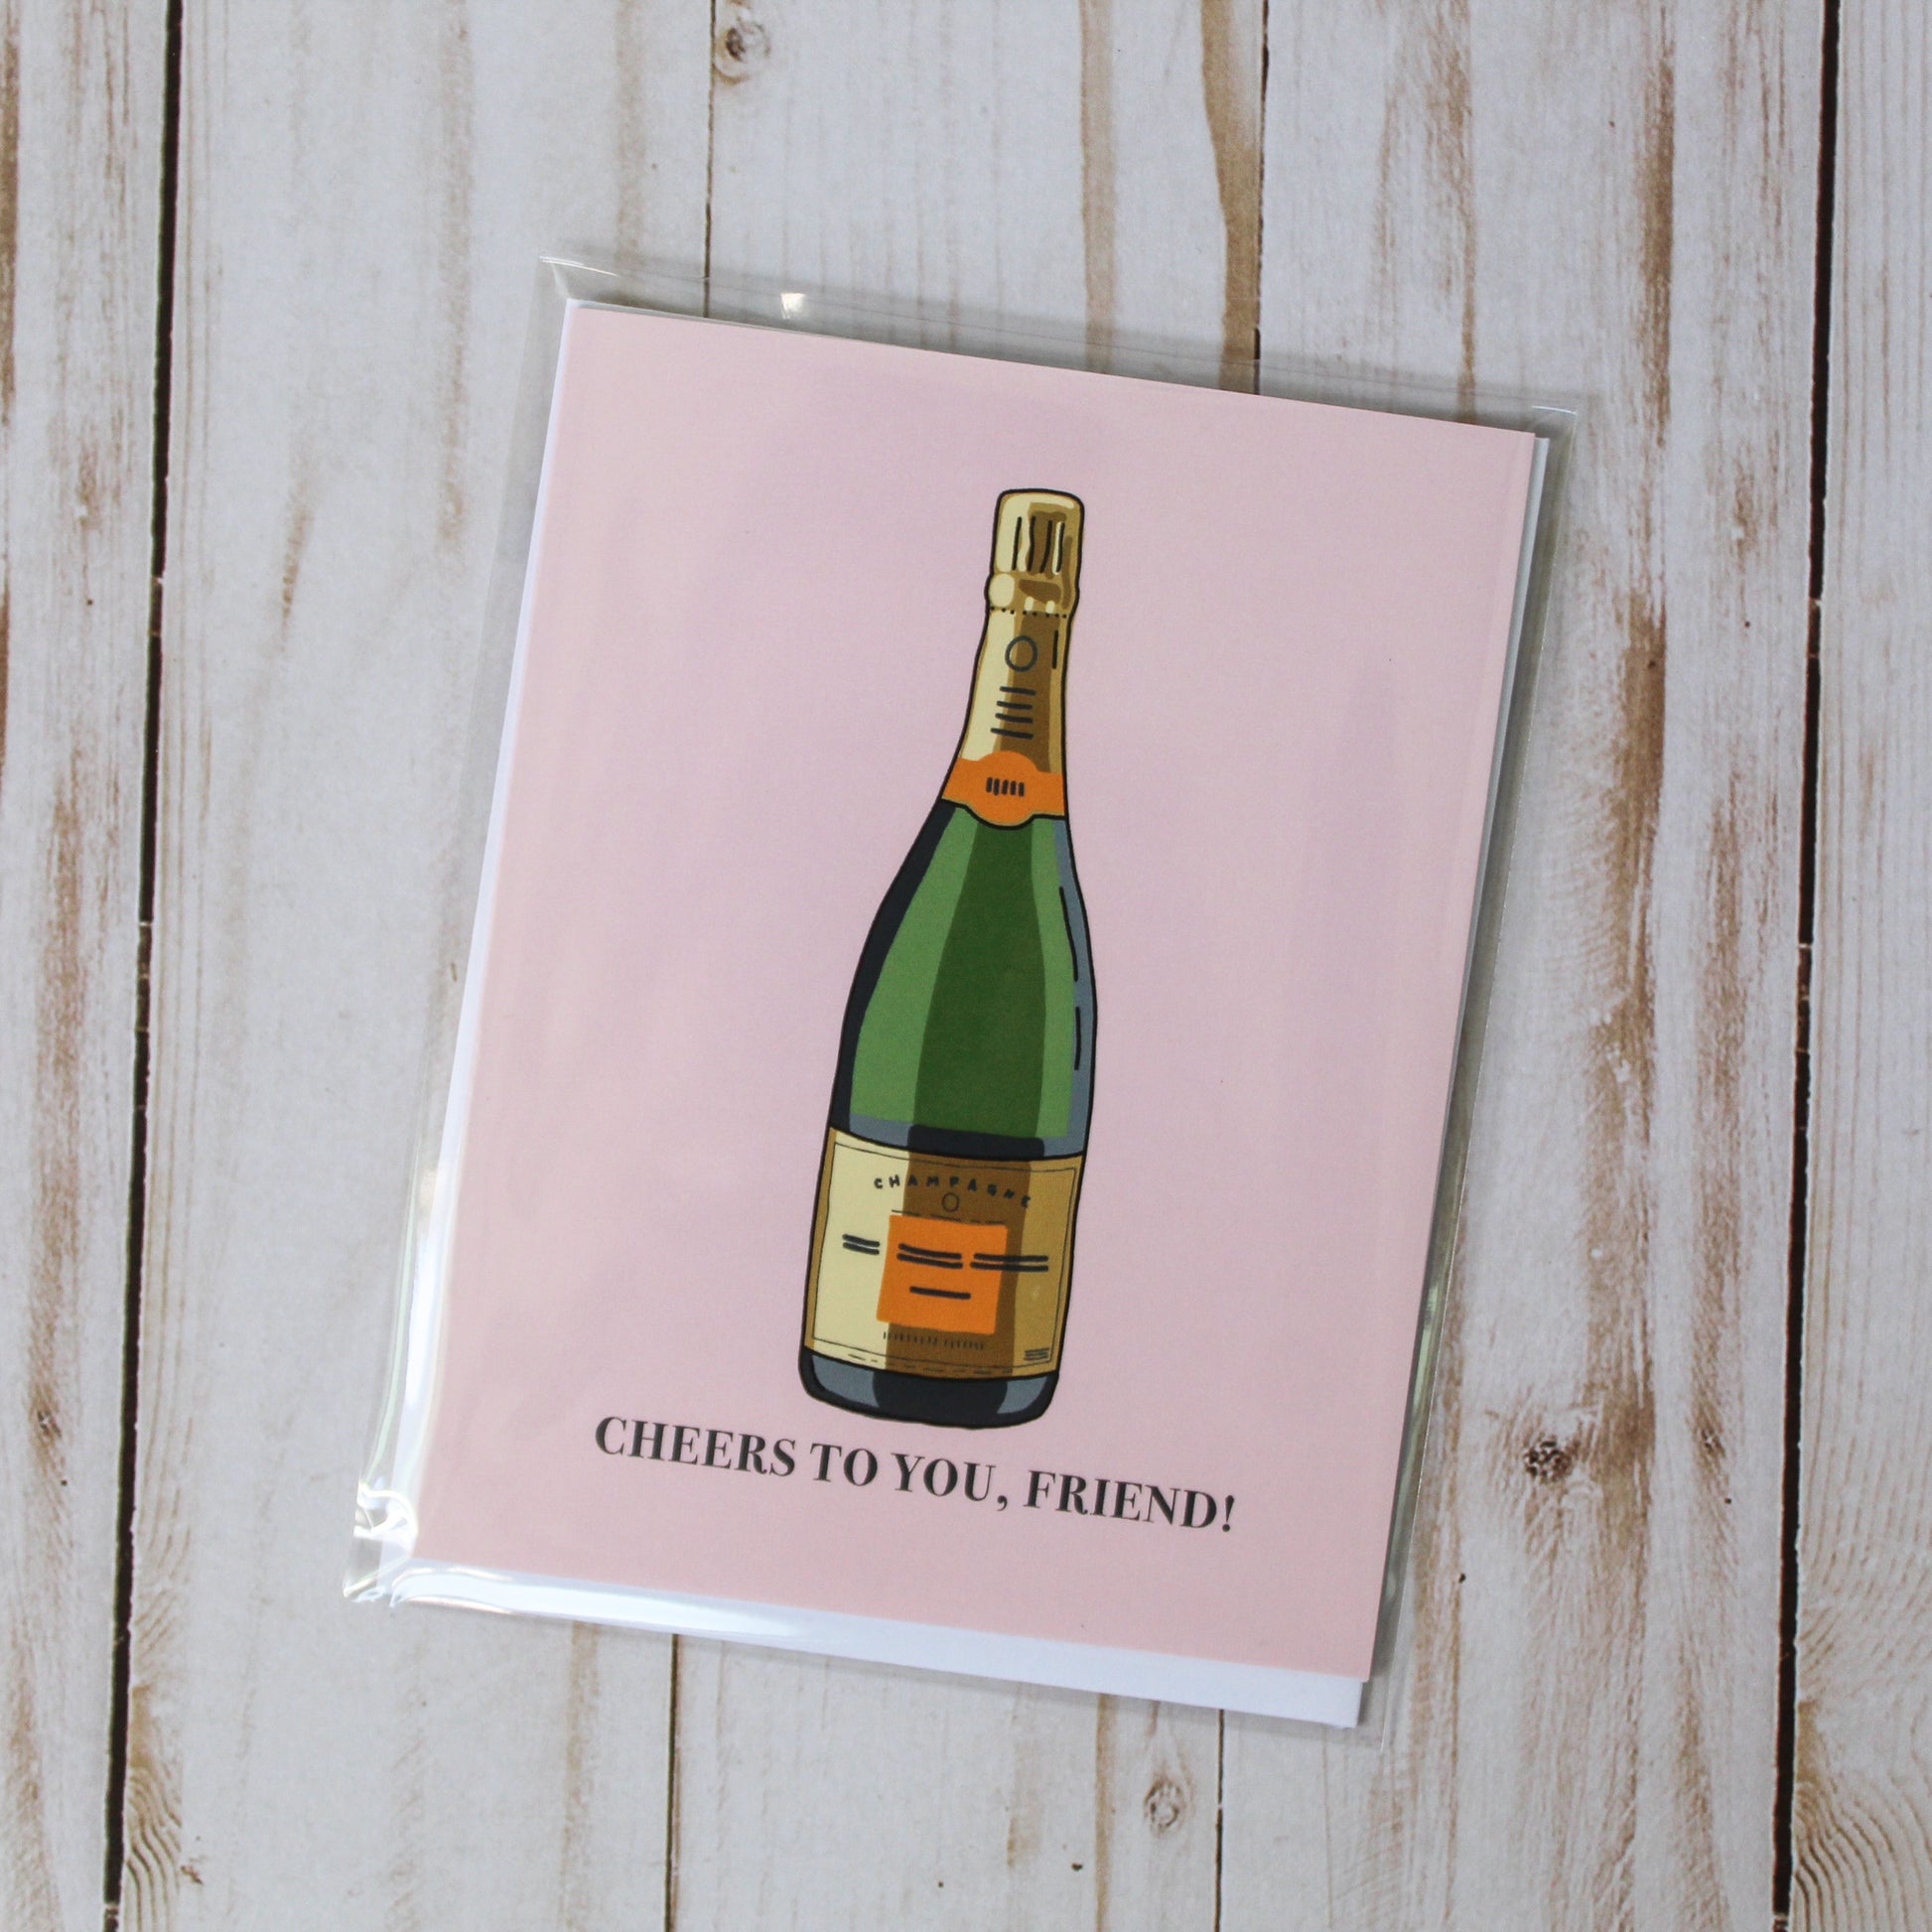 Cheers to You, Friend!' card. This versatile card is suitable for celebrations or simply to show appreciation, making it perfect for any occasion. Measuring 4.25" in height by 5.5" in width, each card provides ample space for your personal message inside. 